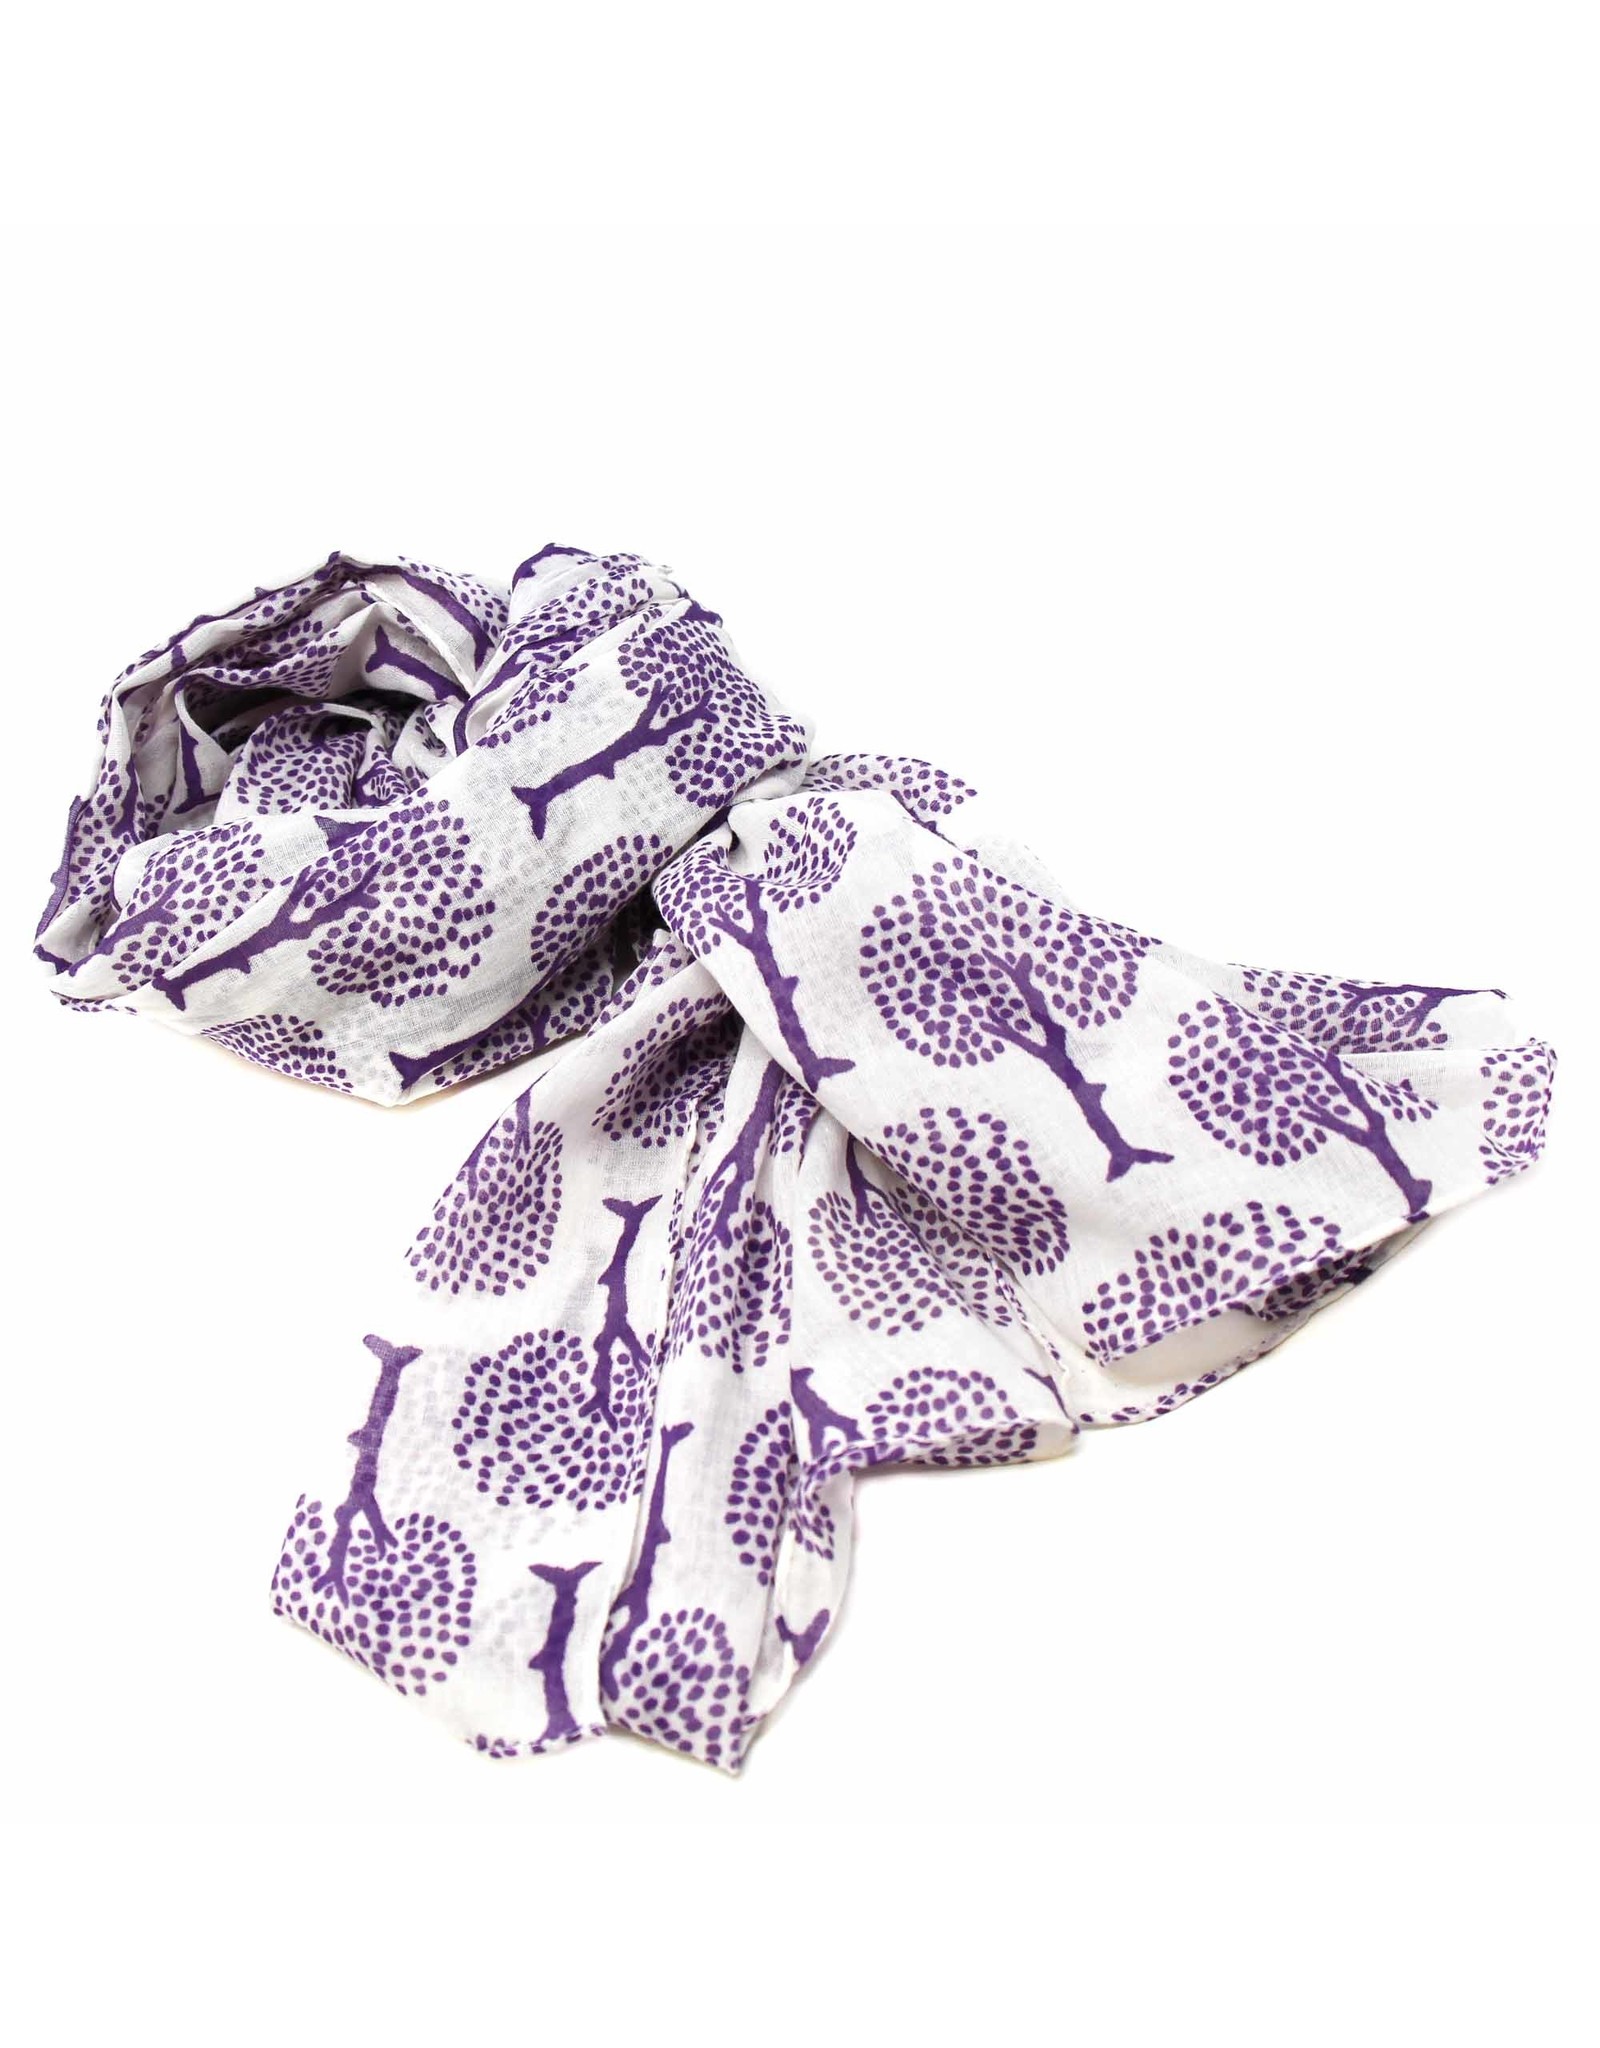 Trade roots Cotton Scarf, Tree of Life, India